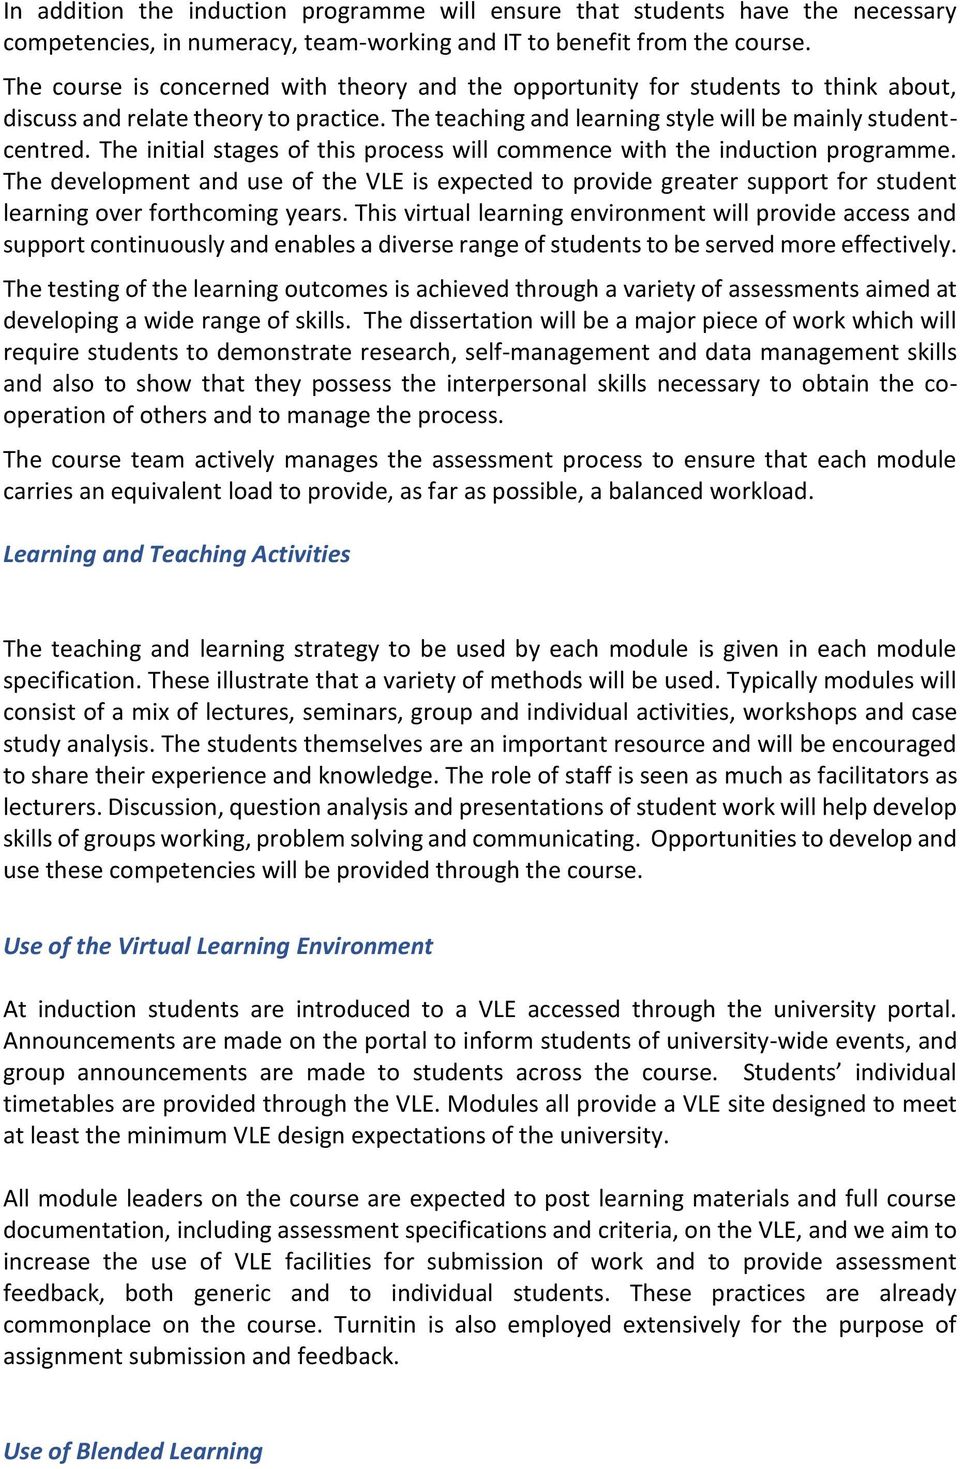 The initial stages of this process will commence with the induction programme. The development and use of the VLE is expected to provide greater support for student learning over forthcoming years.